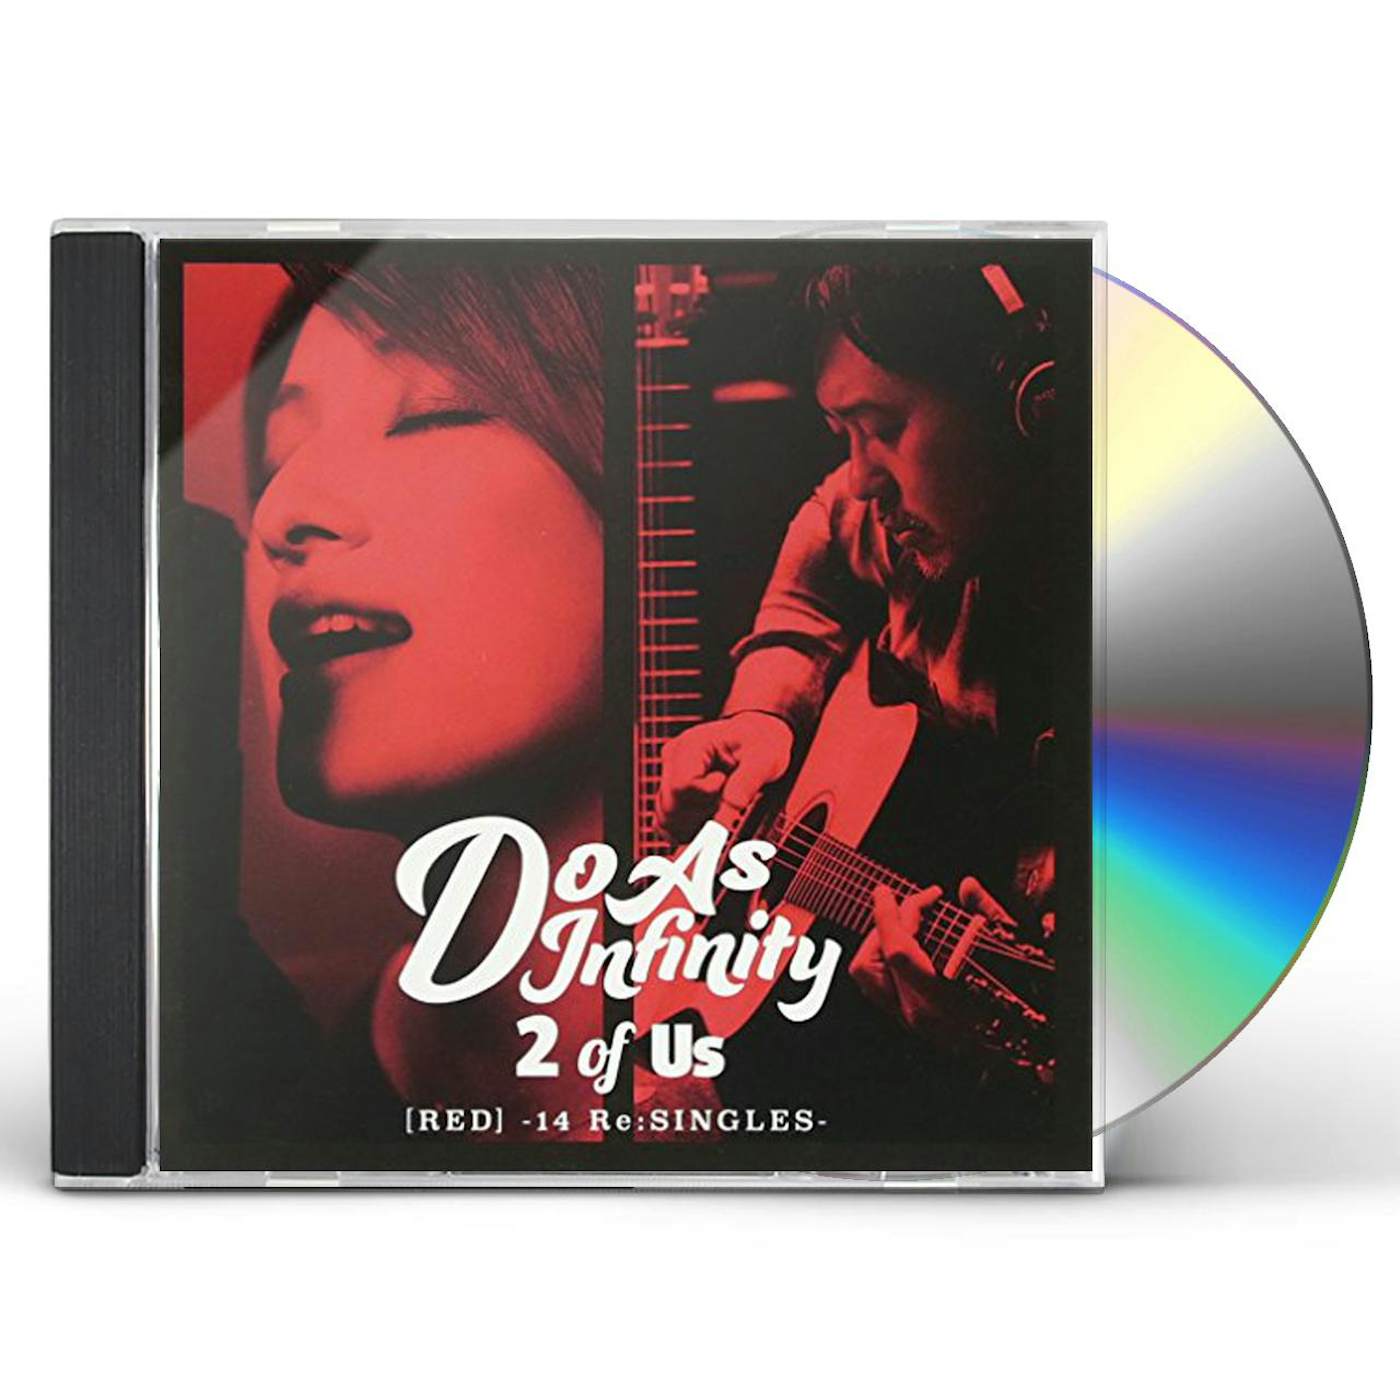 Do As Infinity 2 OF US  - 14 RE:SINGLES: DELUXE EDITION CD